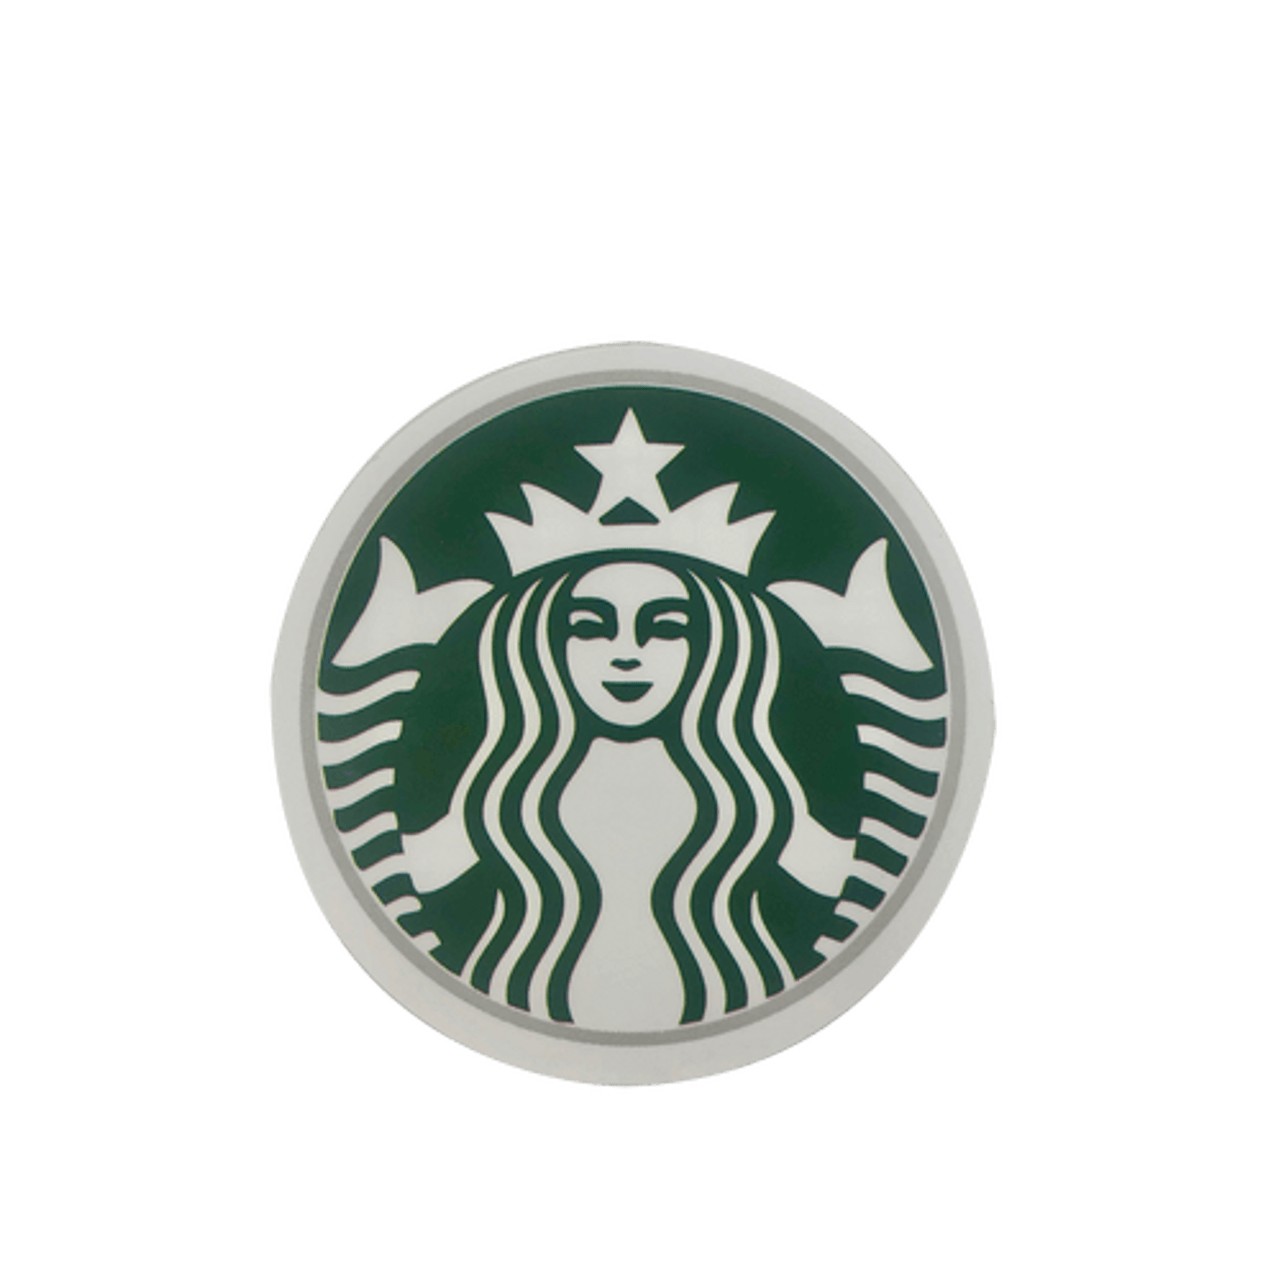 https://cdn11.bigcommerce.com/s-gn3o5e7ts4/images/stencil/1280x1280/products/127/473/starbucks-coffee-sticker-coolersbyu__81368.1593654953.png?c=2